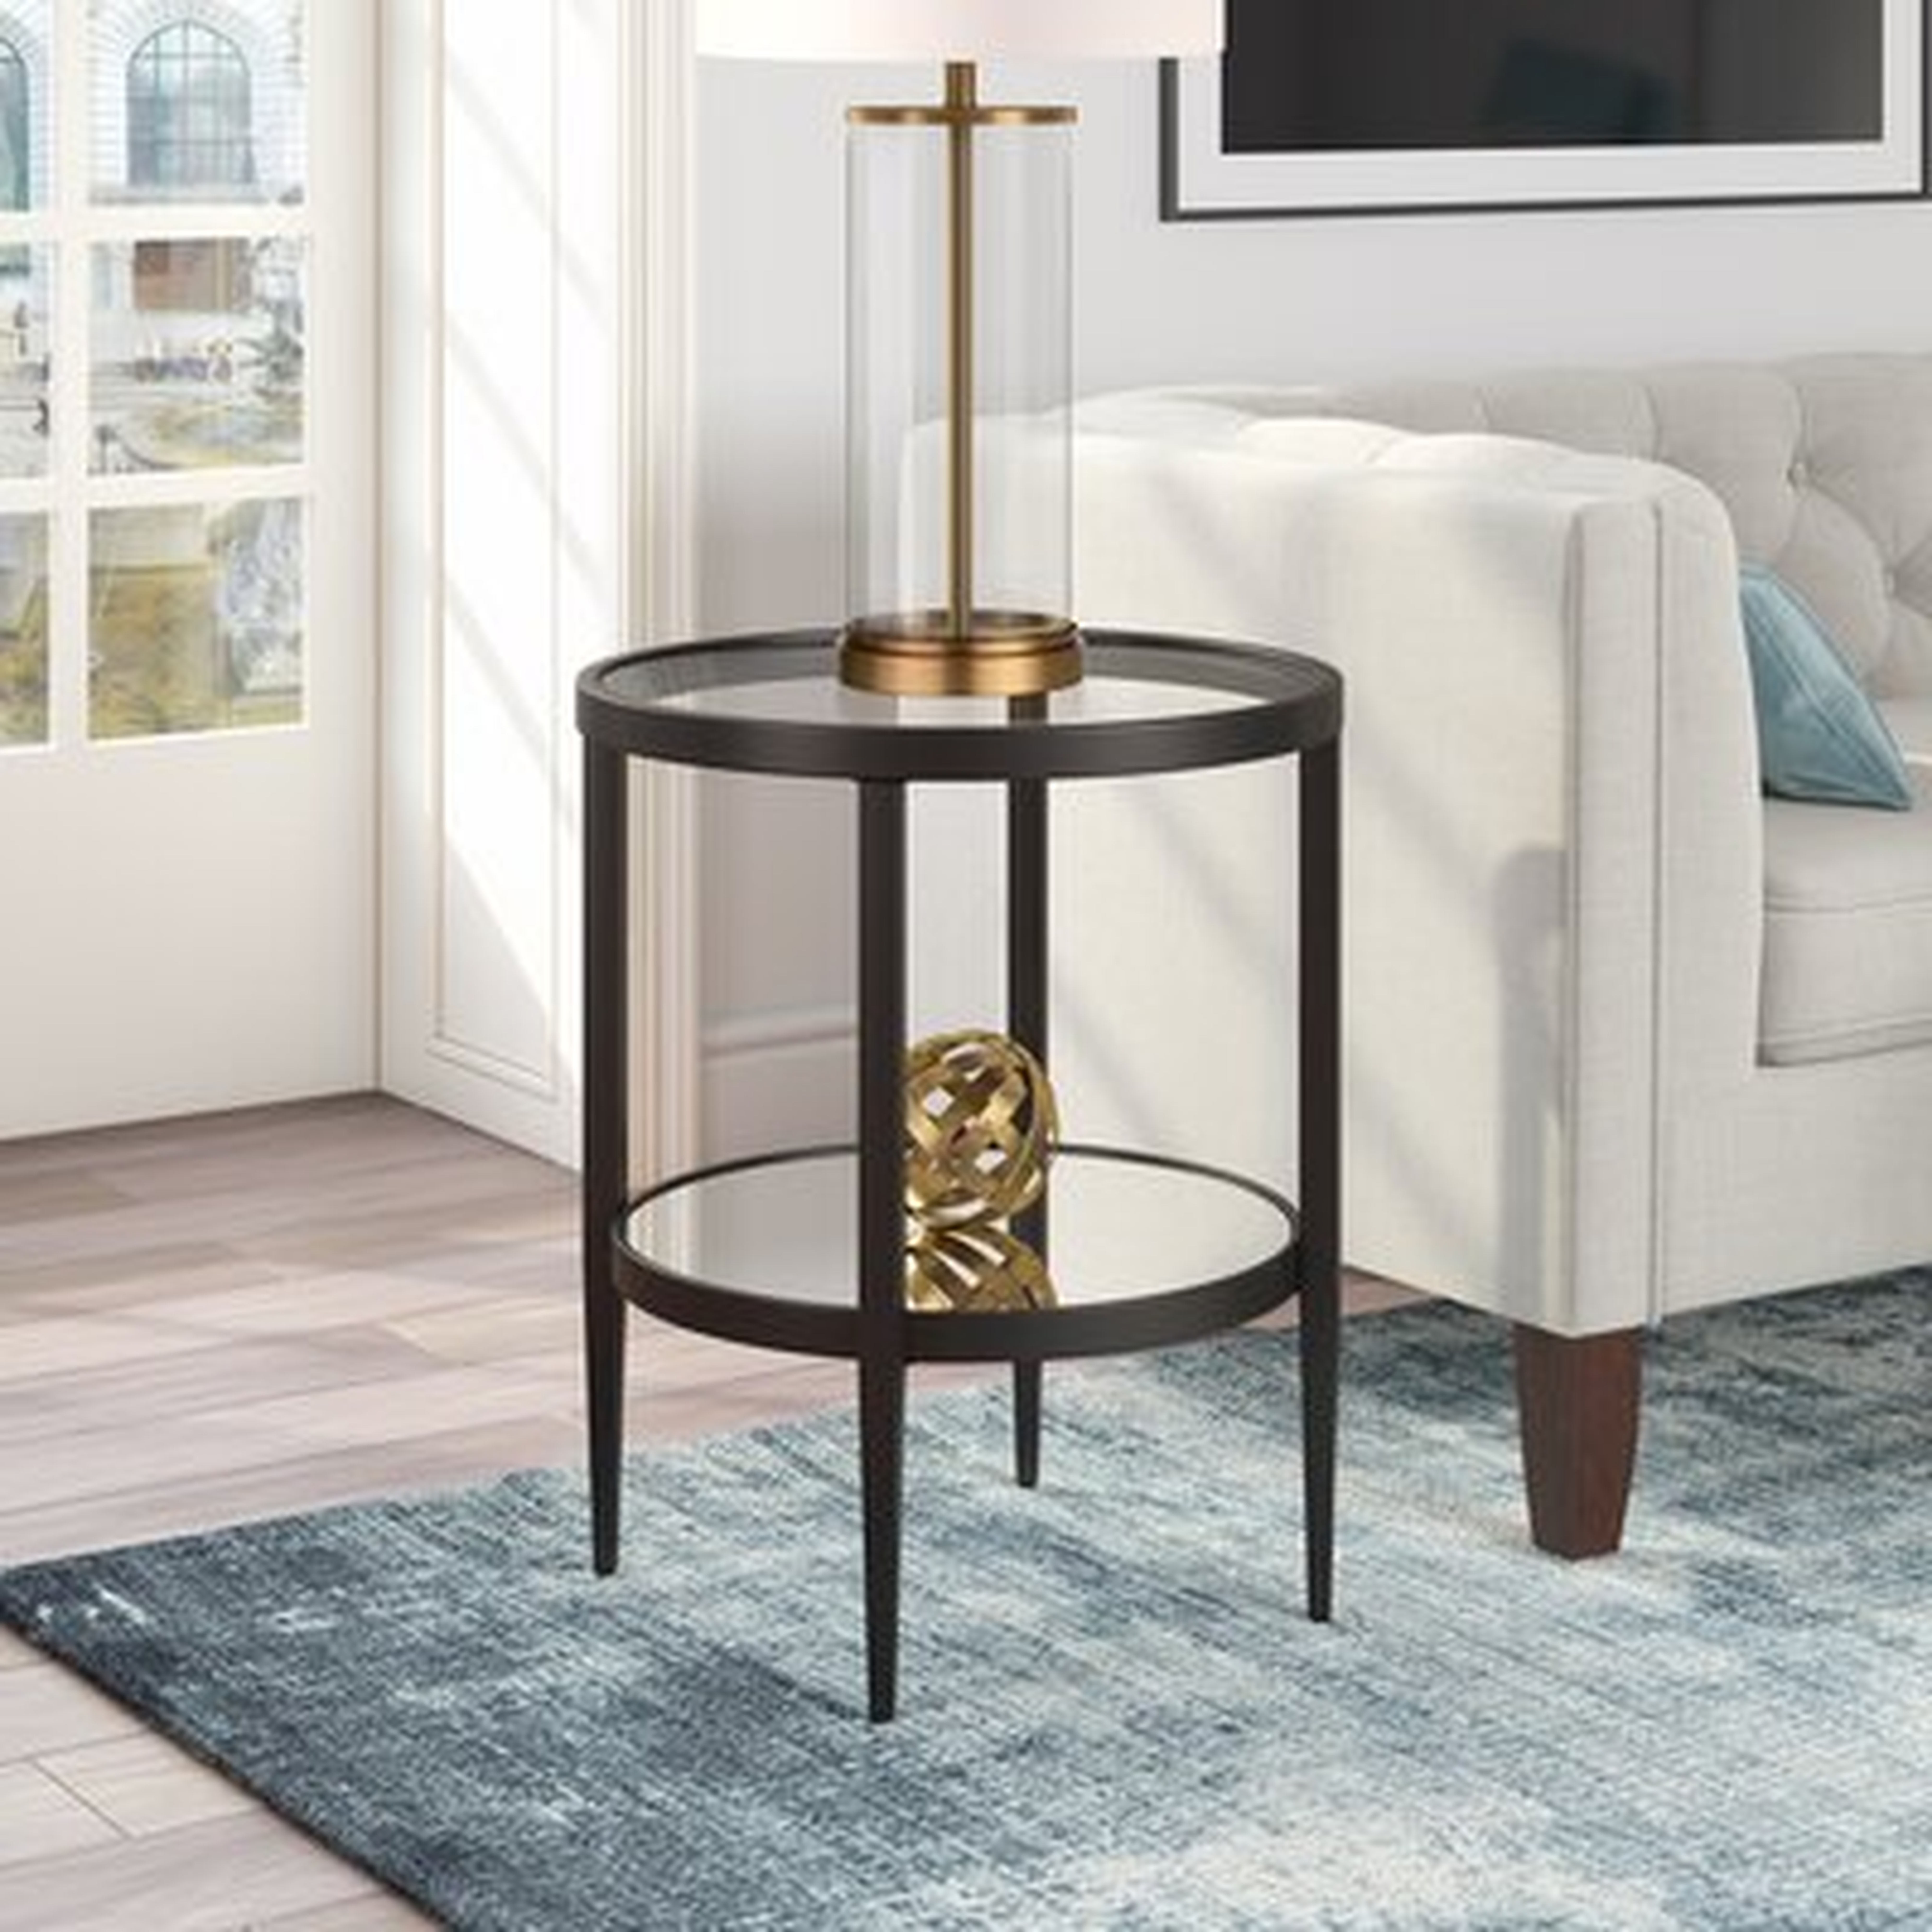 Barbara Glass Top End Table with Storage - Wayfair